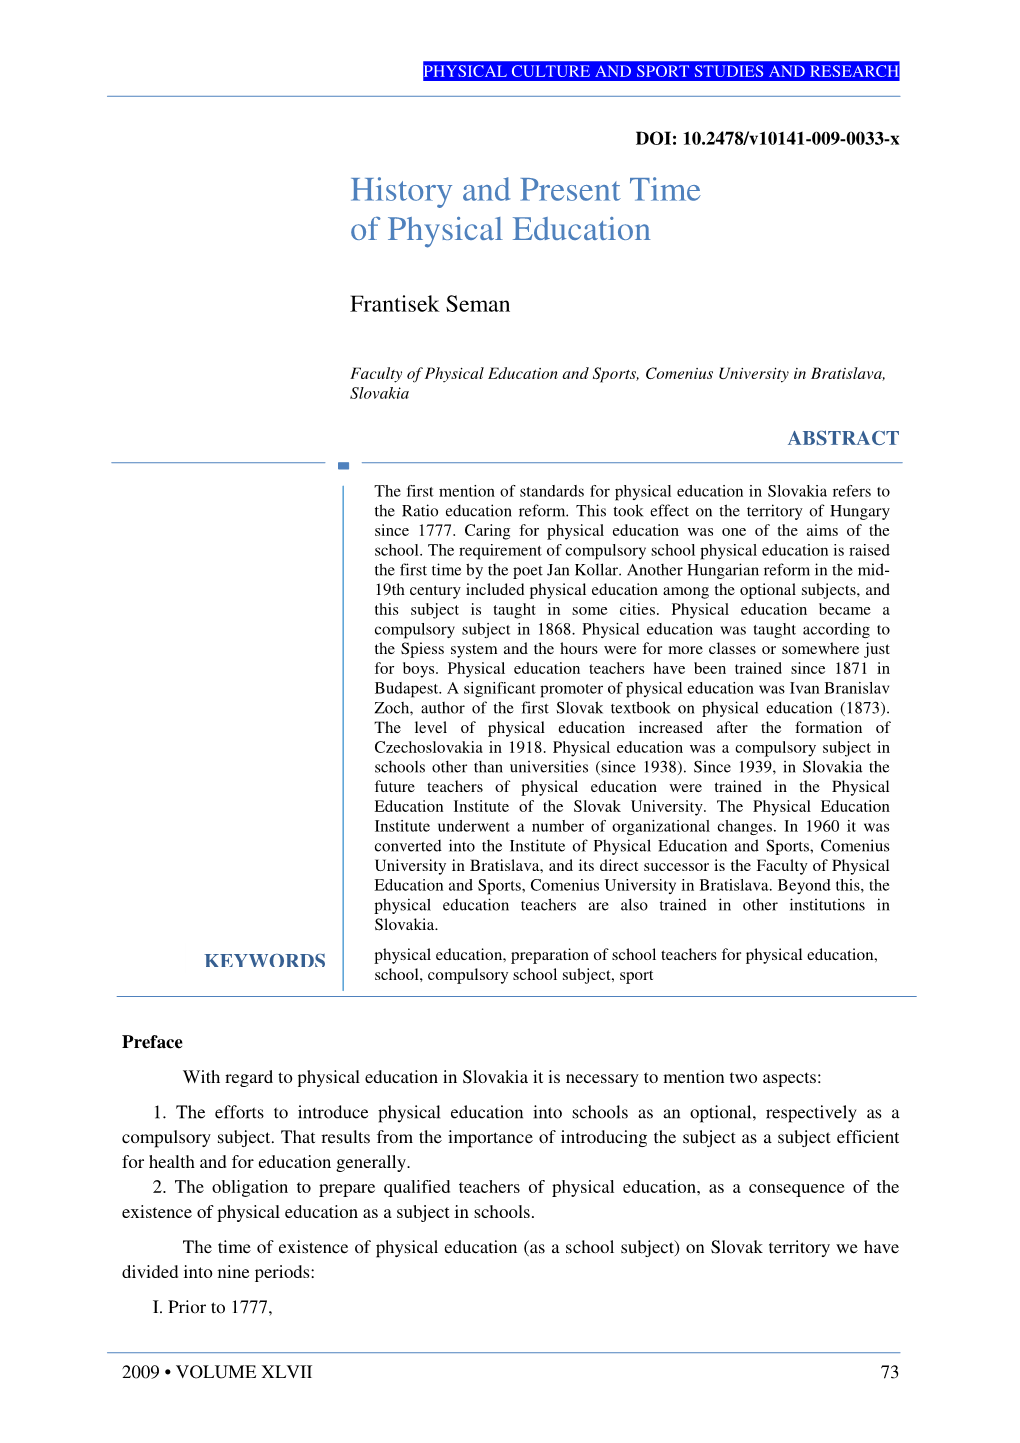 History and Present Time of Physical Education